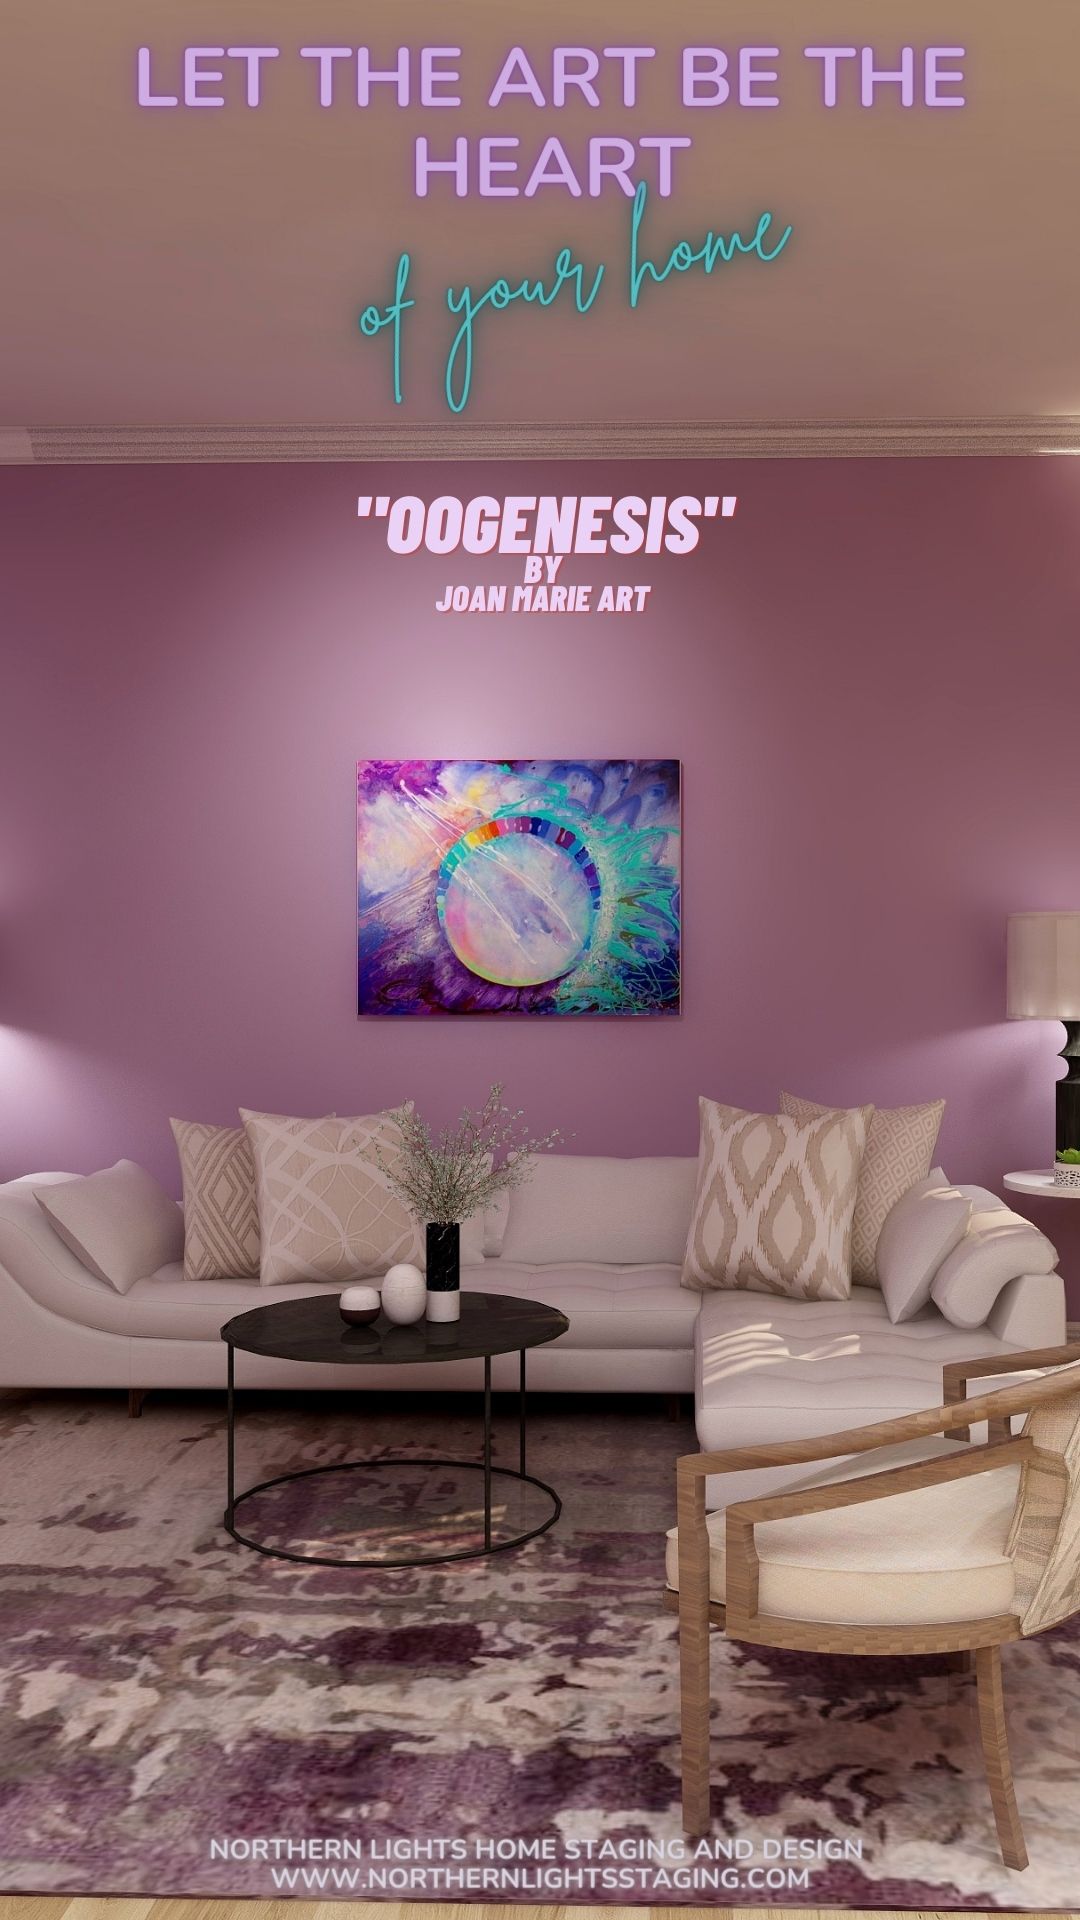 Let the Art be the Heart of Your Home. "Oogenesis" by Joan Marie Art in an Edesign by Northern Lights Home Staging and Design